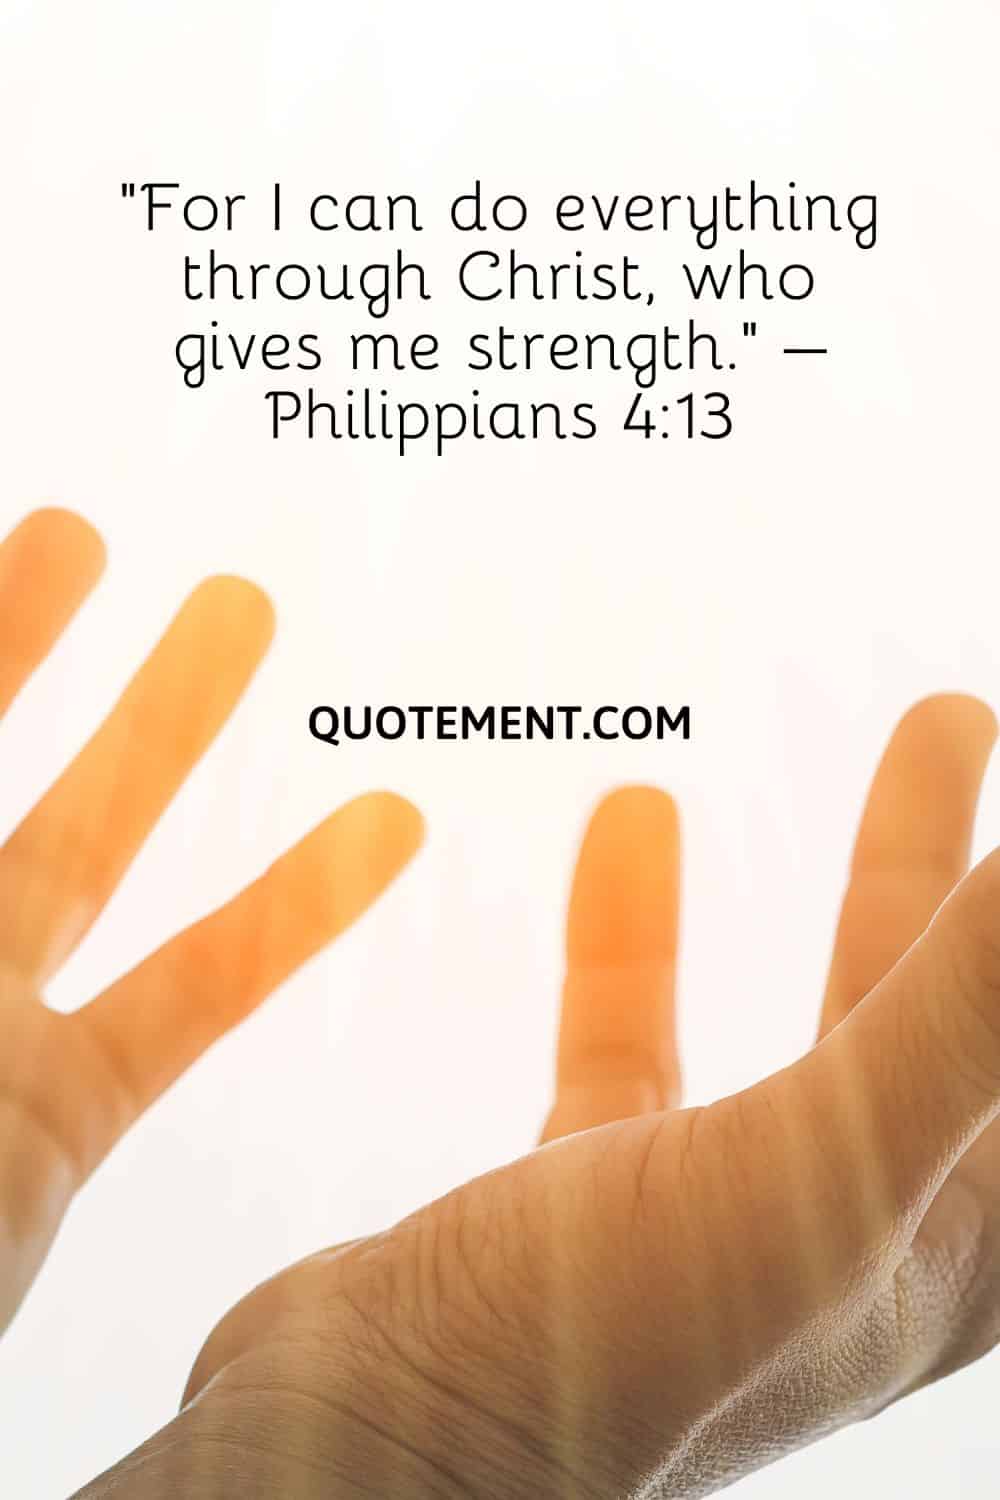 “For I can do everything through Christ, who gives me strength.” – Philippians 413